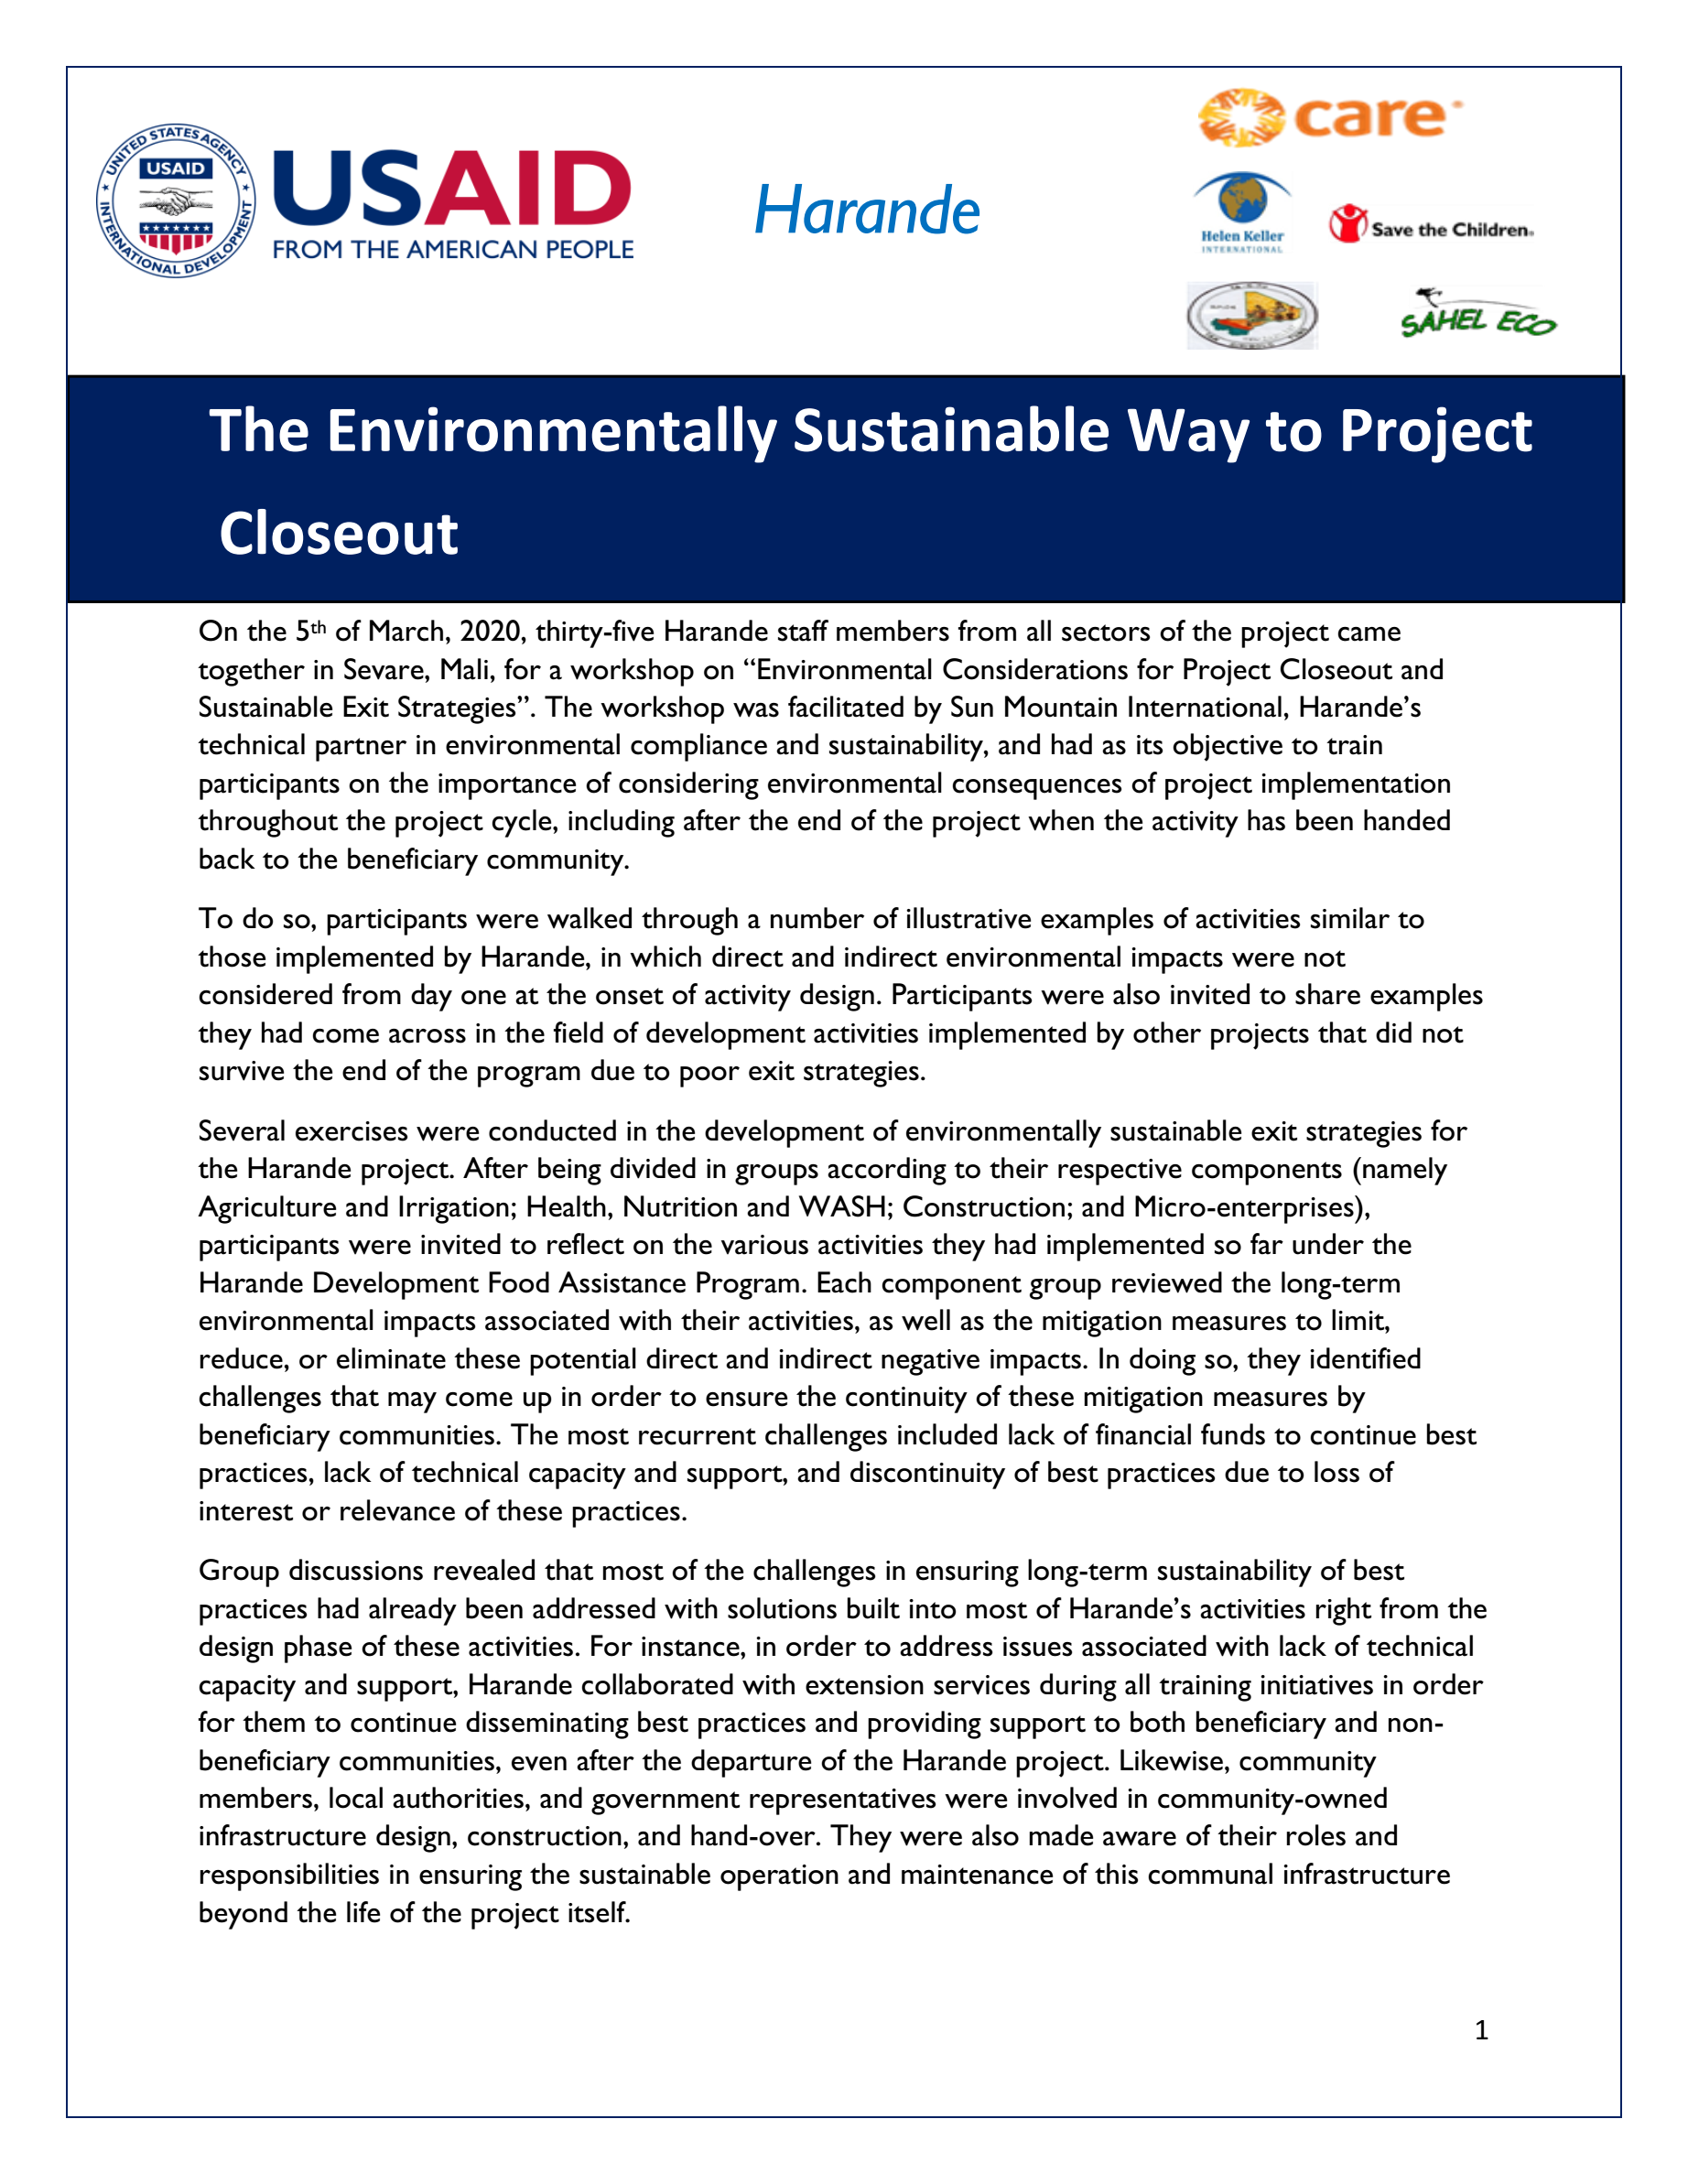 The Environmentally Sustainable Way to Project Closeout - Harande